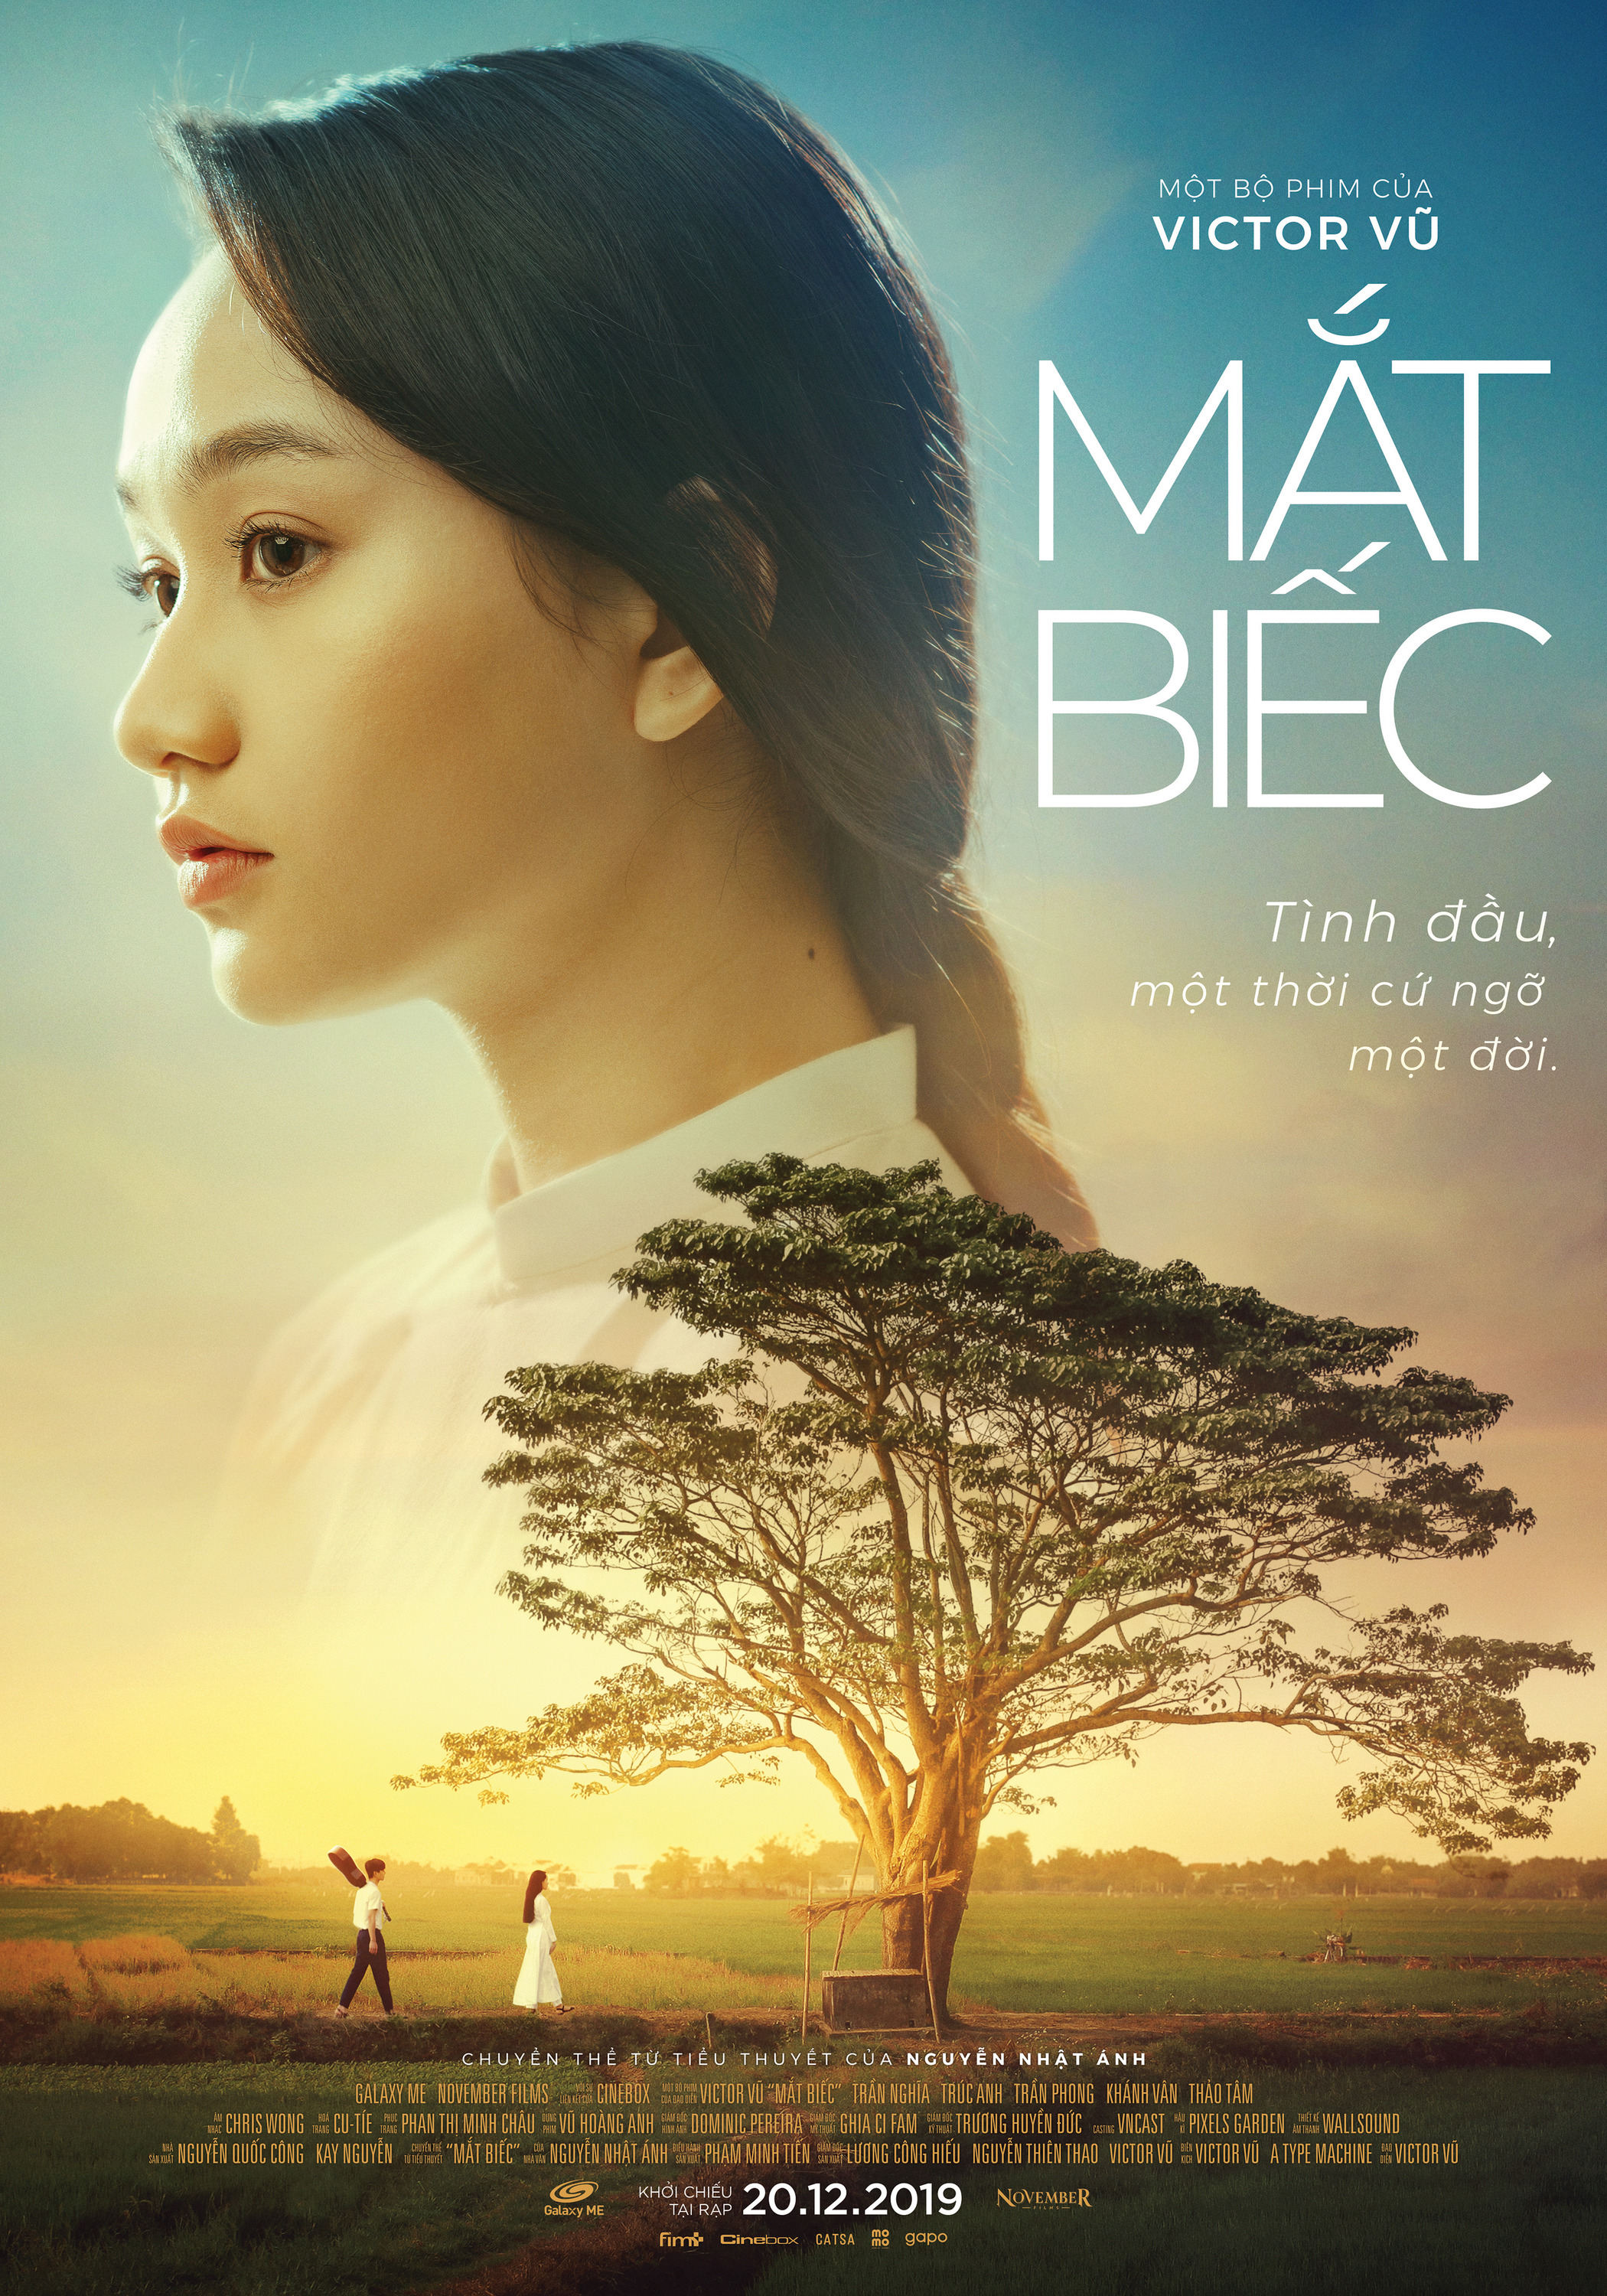 Mega Sized Movie Poster Image for Mat biec (#3 of 15)